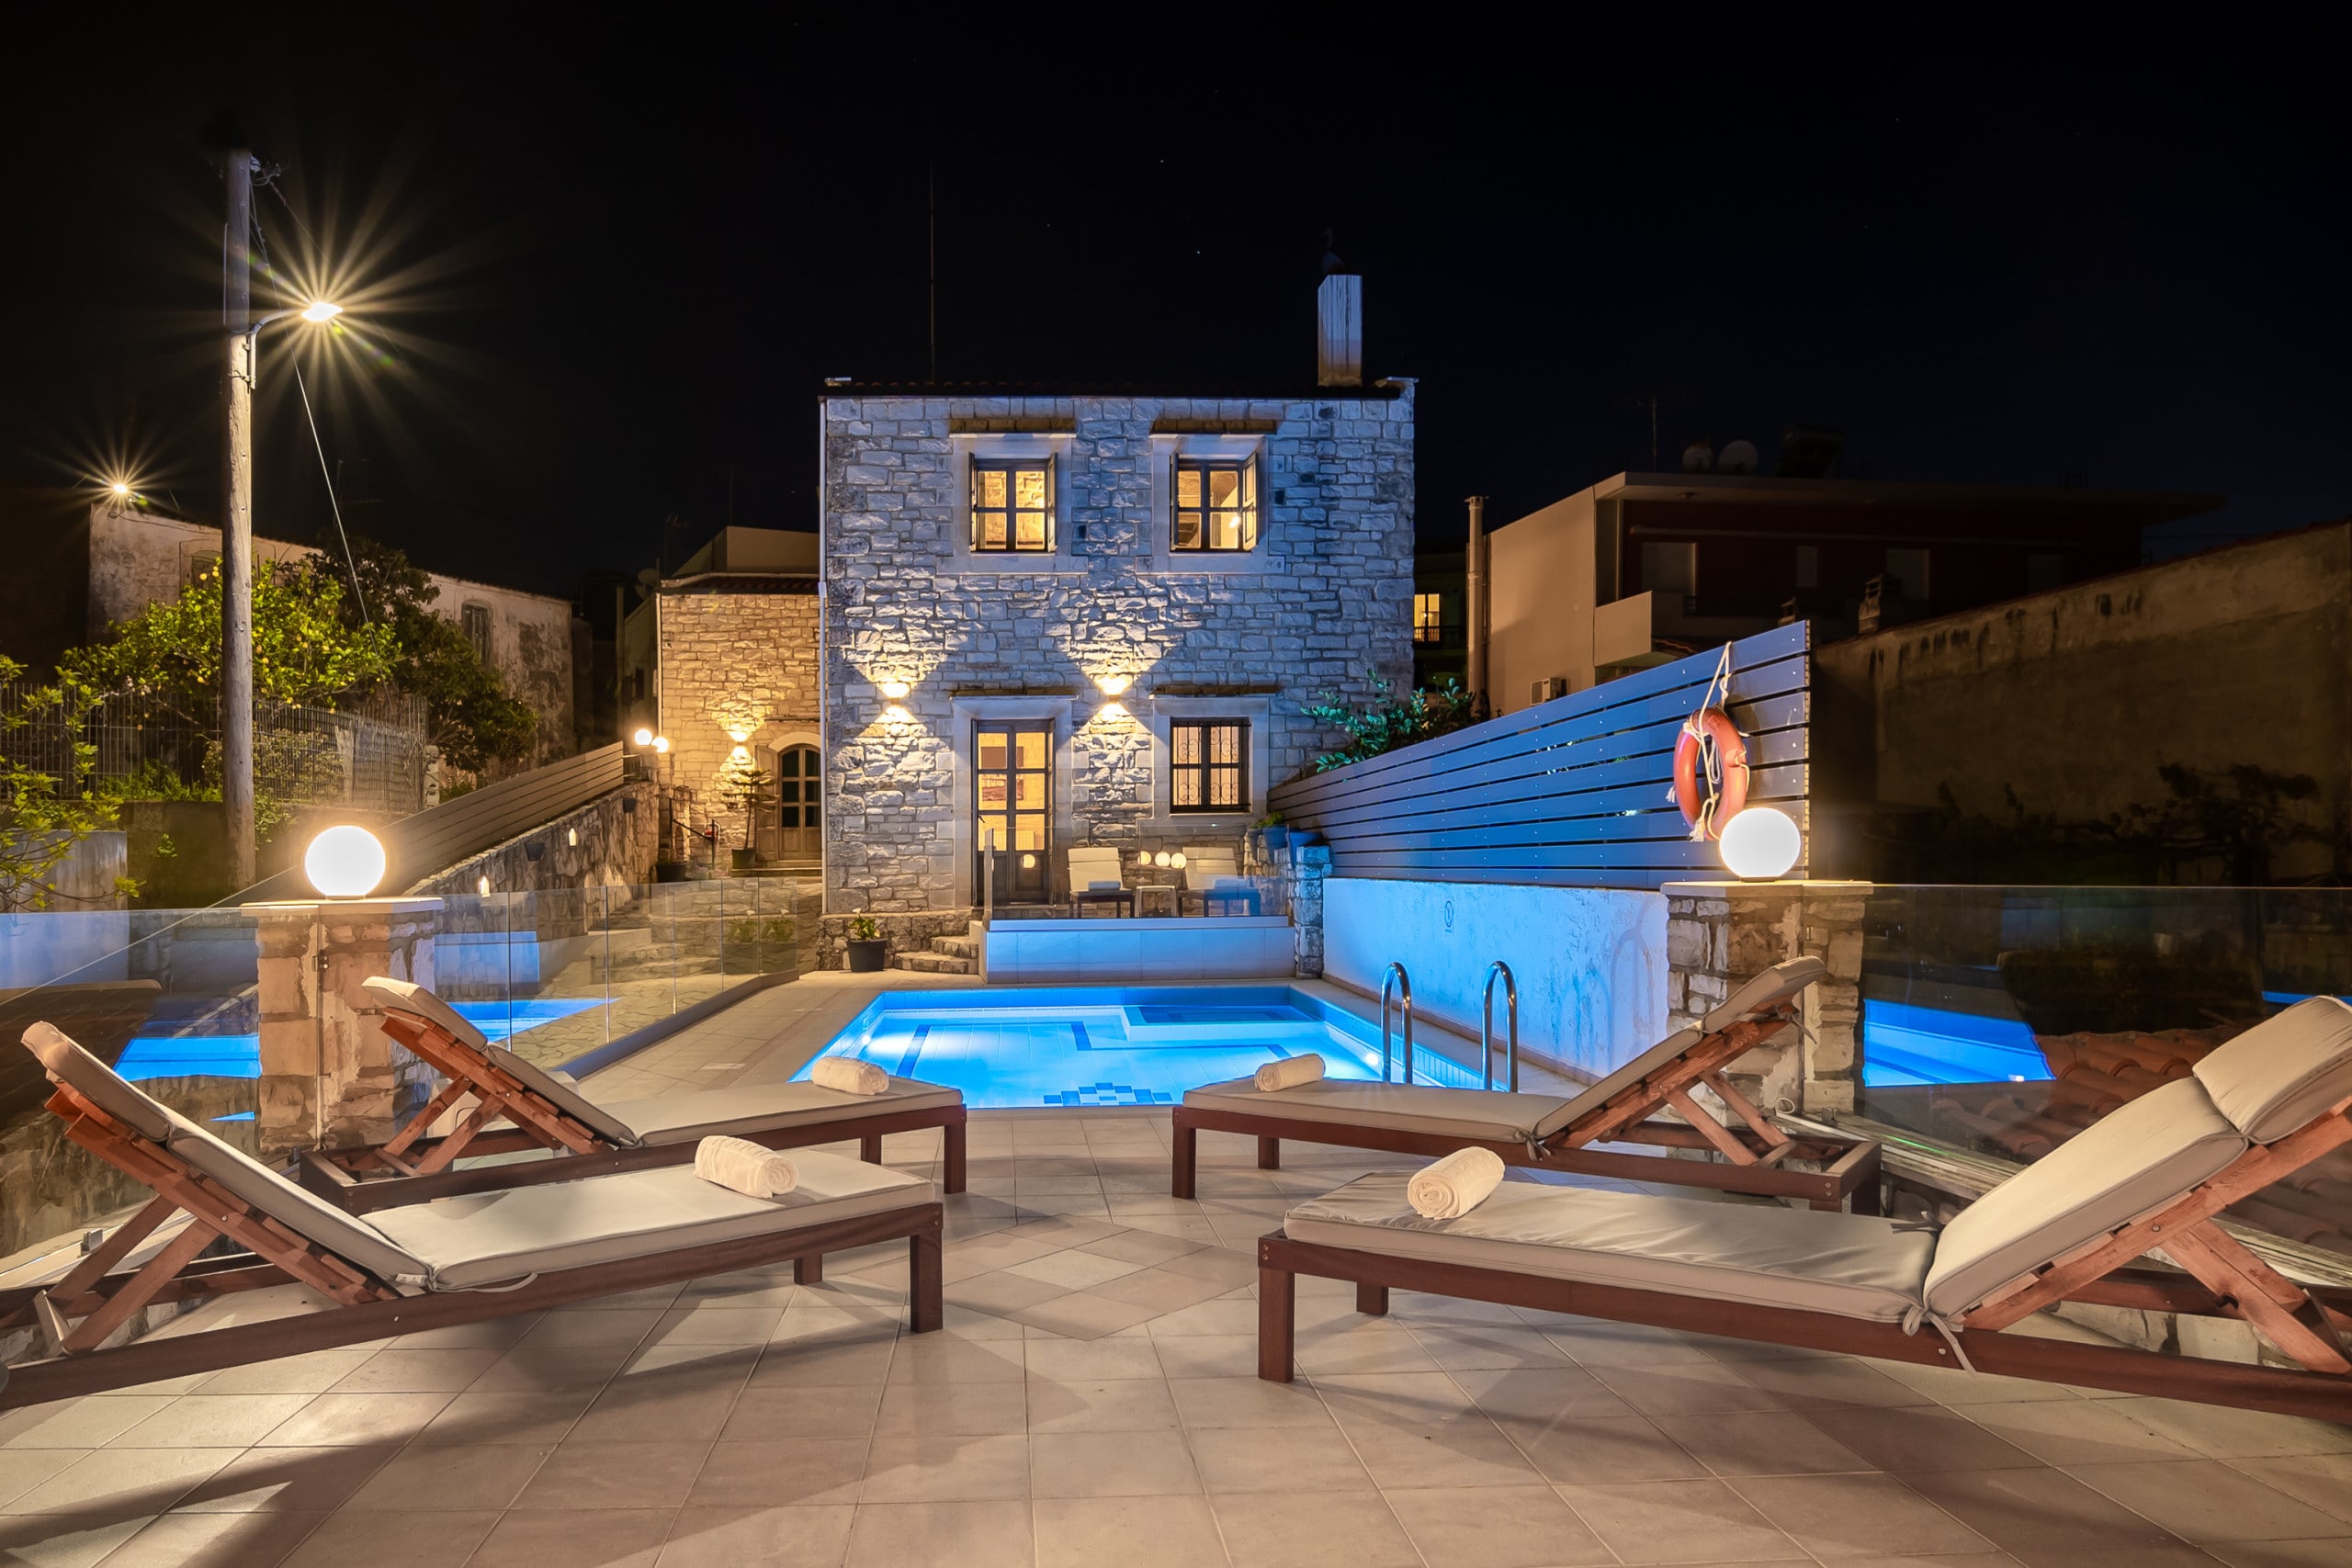 Exterior view of Renovated Villa, 6 persons, Kids pool, Picturesque village, Rethymno